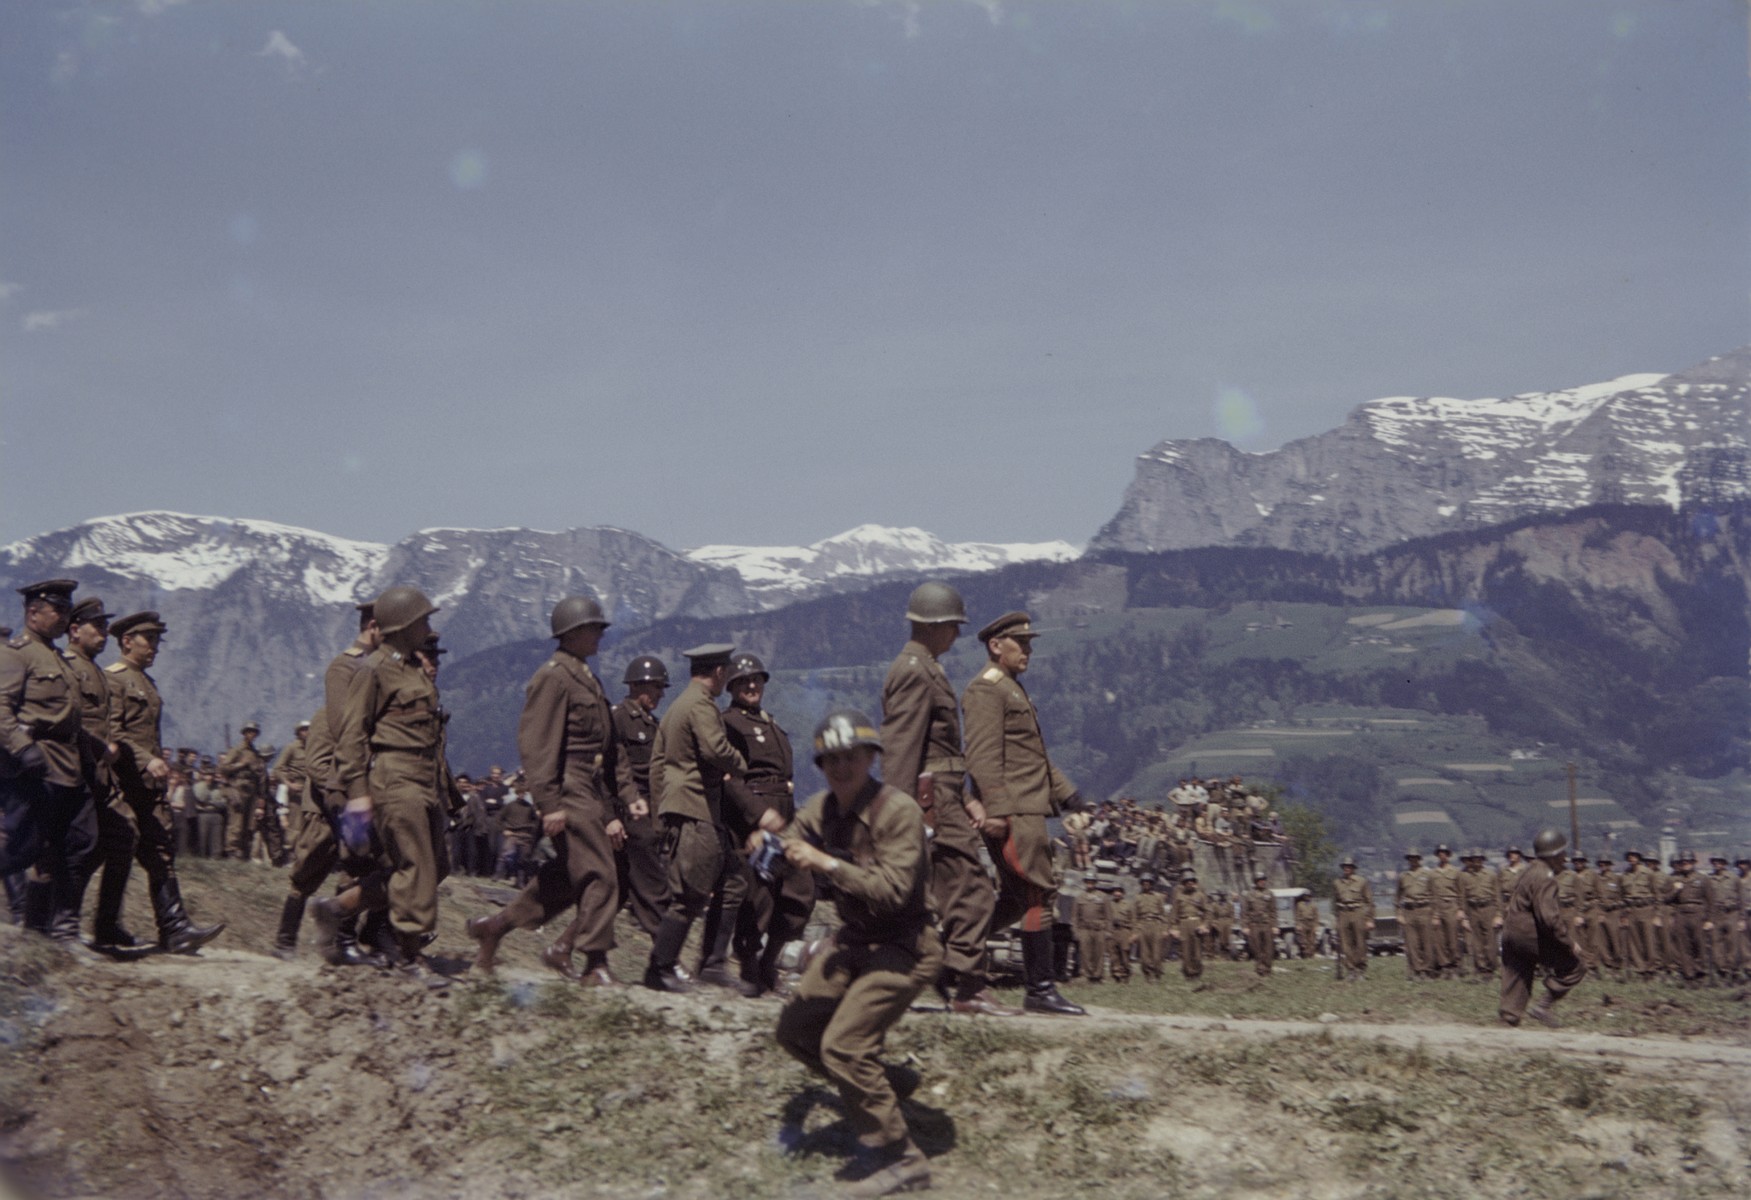 Members of the U.S. 9th Armored Division meet up with units of the Red Army near Linz, Austria.